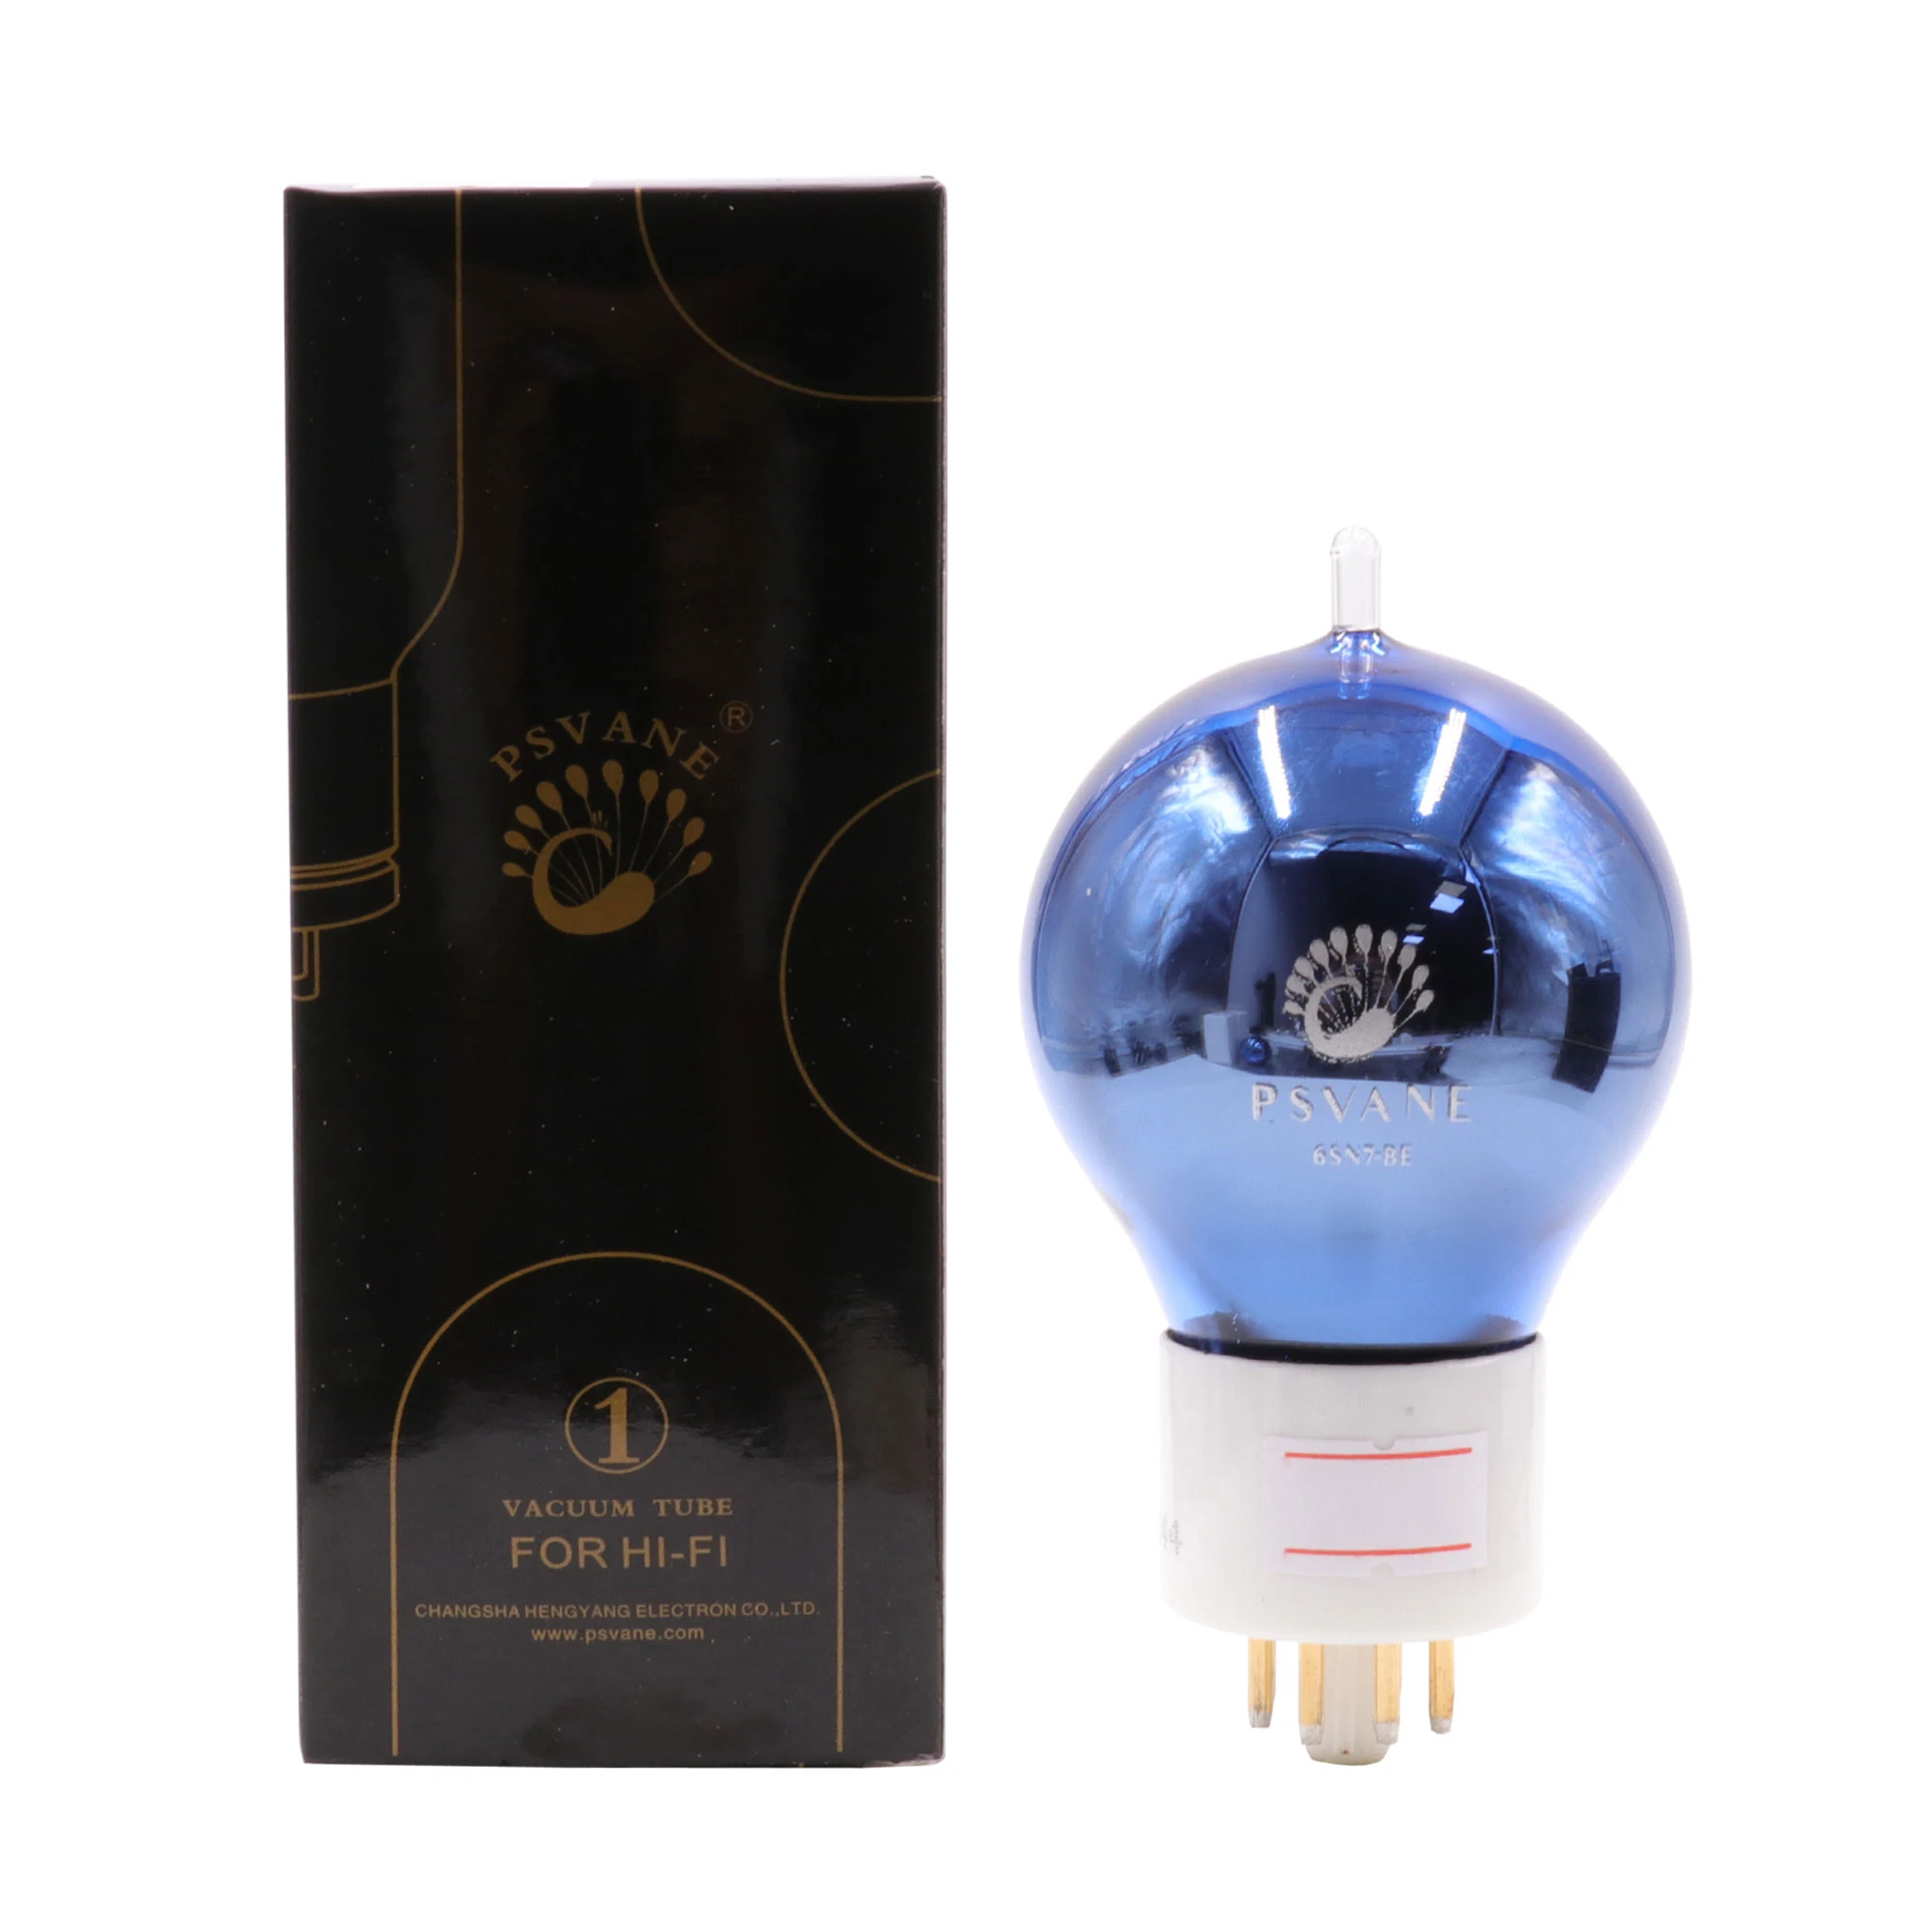 PSVANE 6SN7-BE Vacuum Tube Blue Glass shell Special Customize Version Plate Gold Pin Replace 6N8P 6H8C 6SN7 Matched Pair enlarge